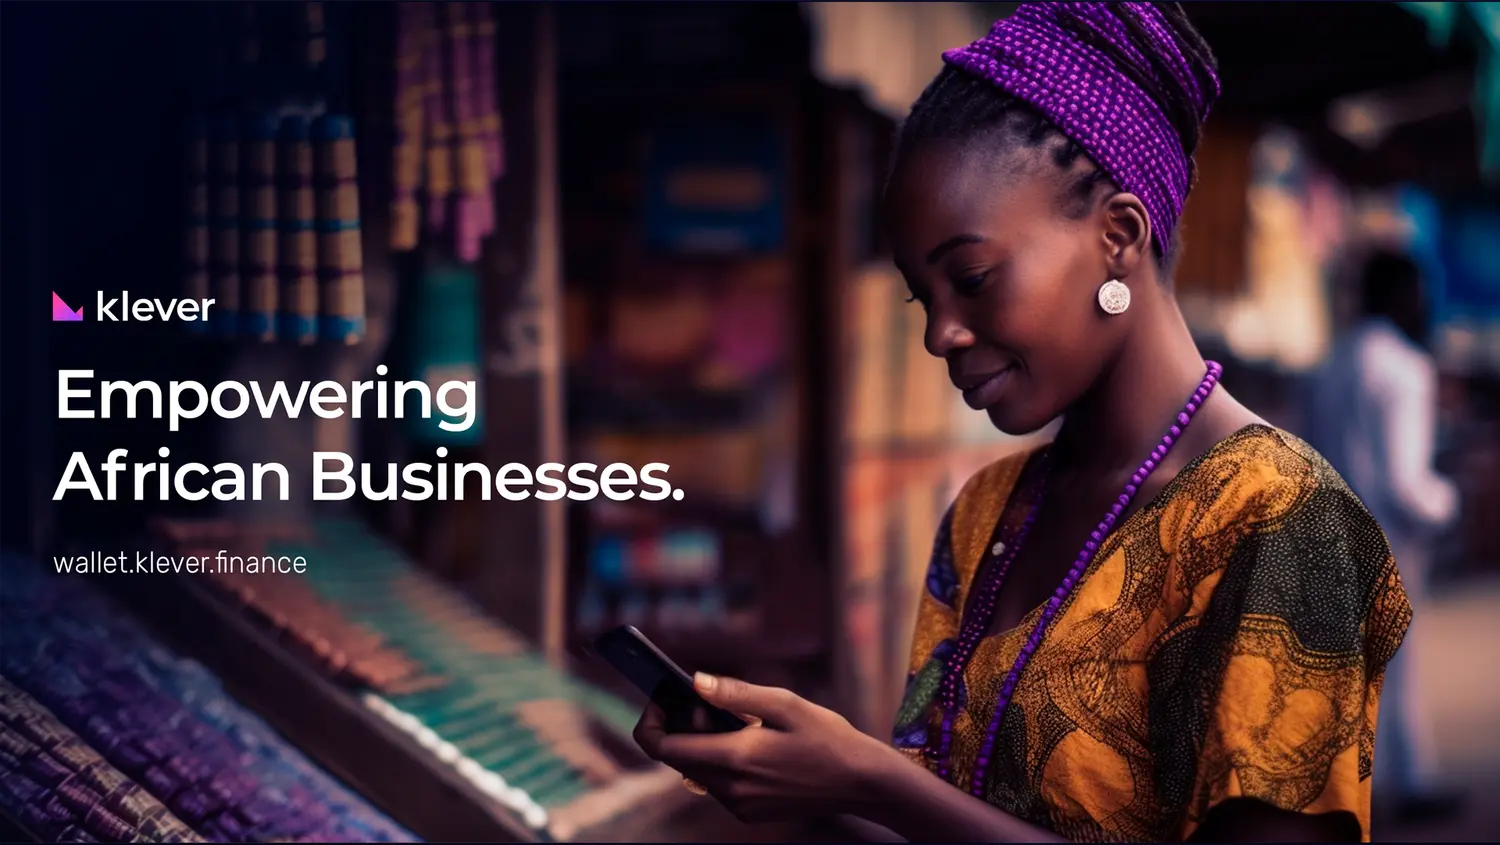 bitcoin and klever wallet empowering african businesses